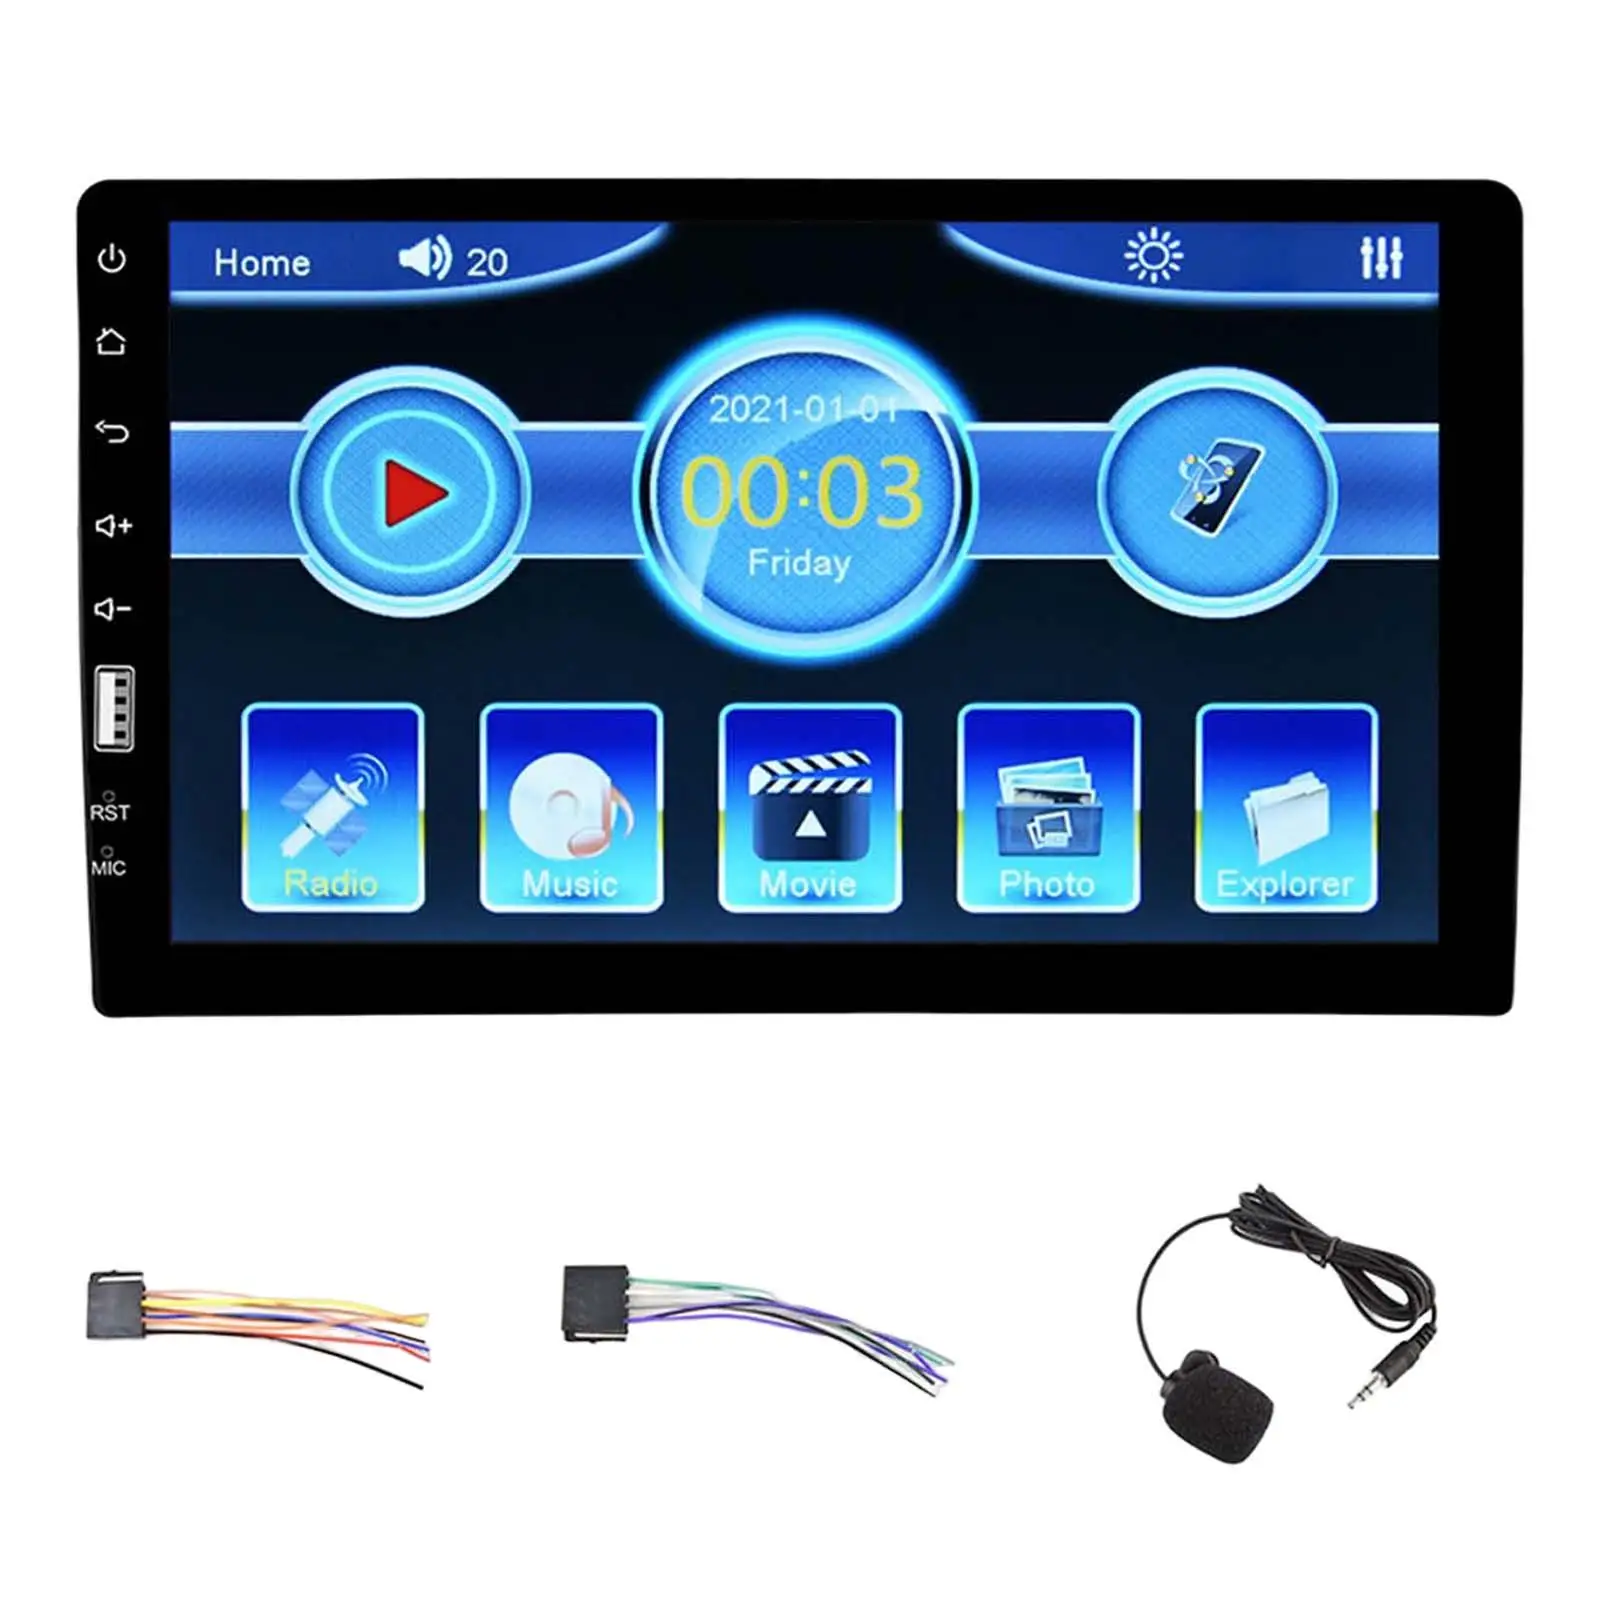 Multimedia Player Hands Free Calling Multicolor Background Lights Car Stereo Radio for Automobile